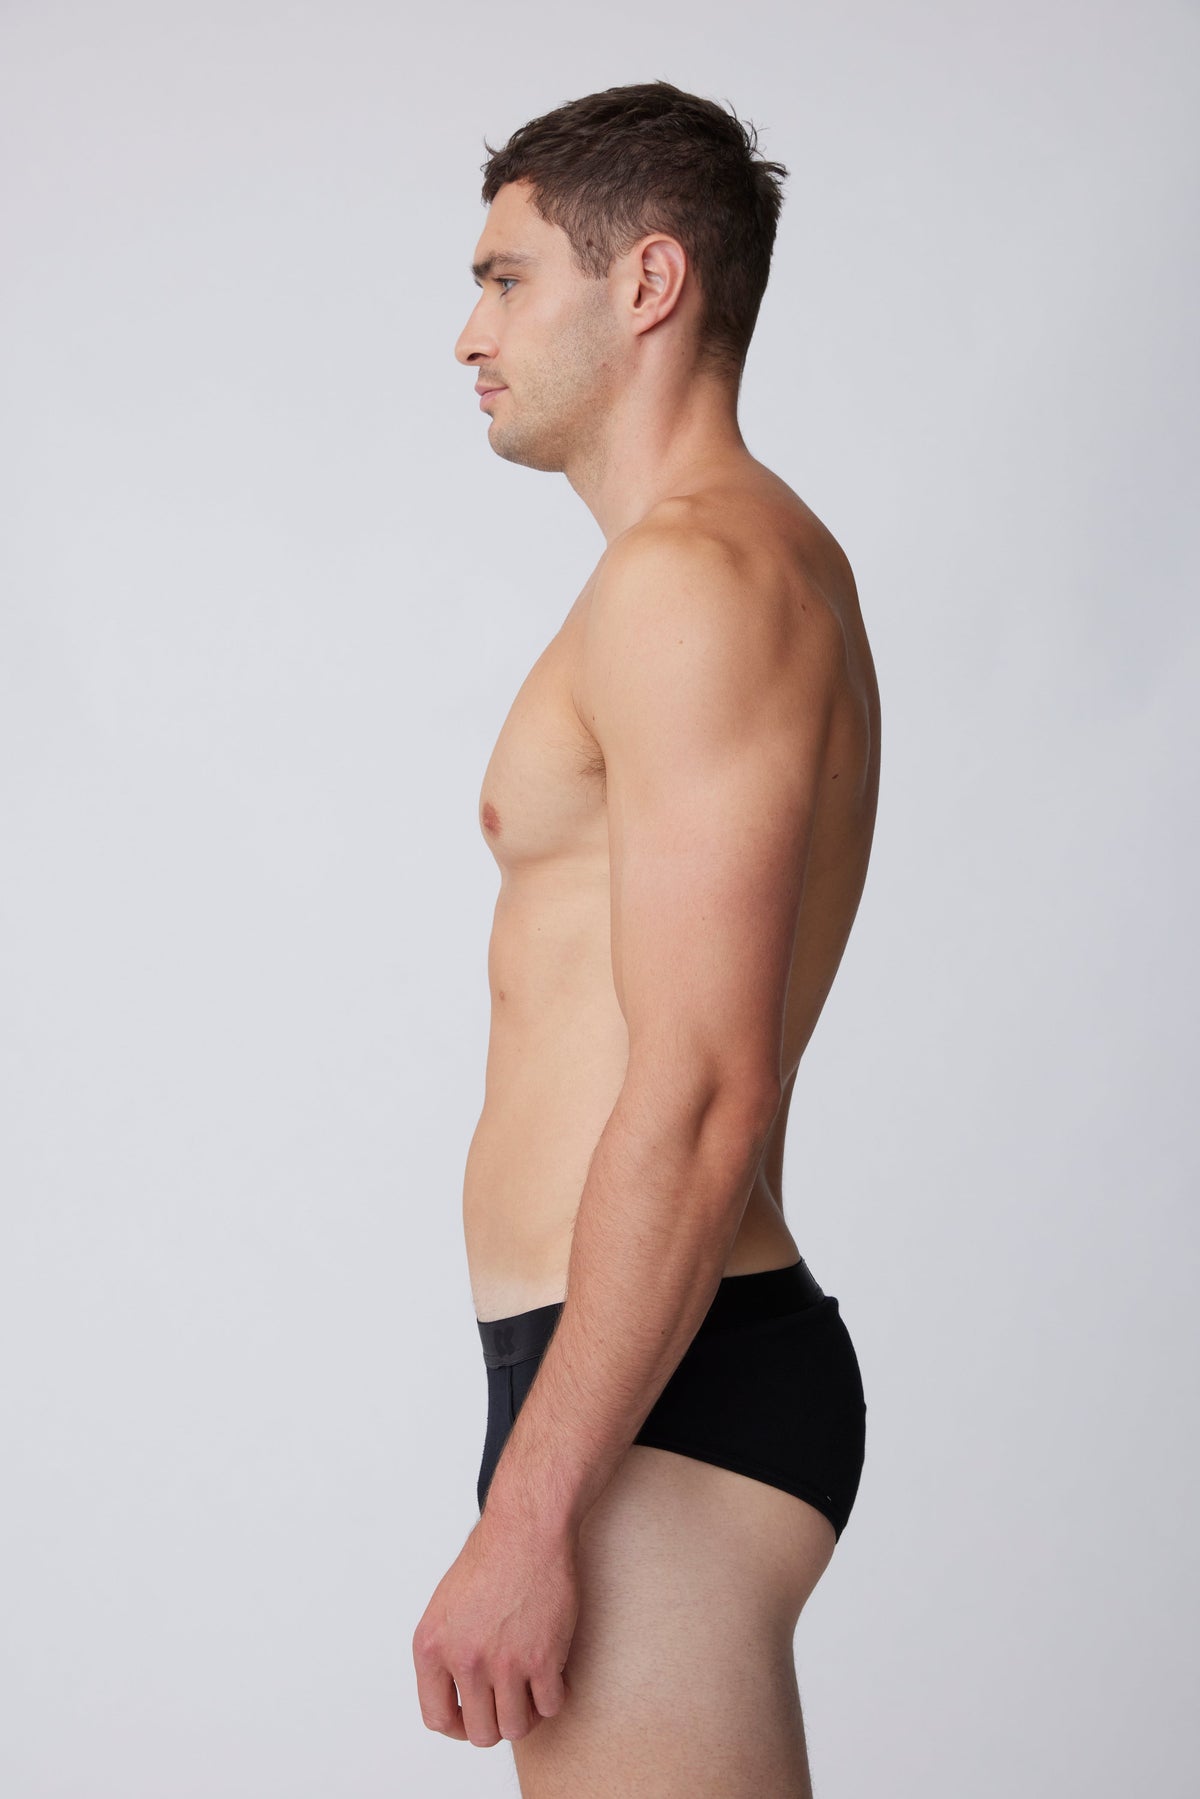 
            White, brunet male wearing only black brief from the side